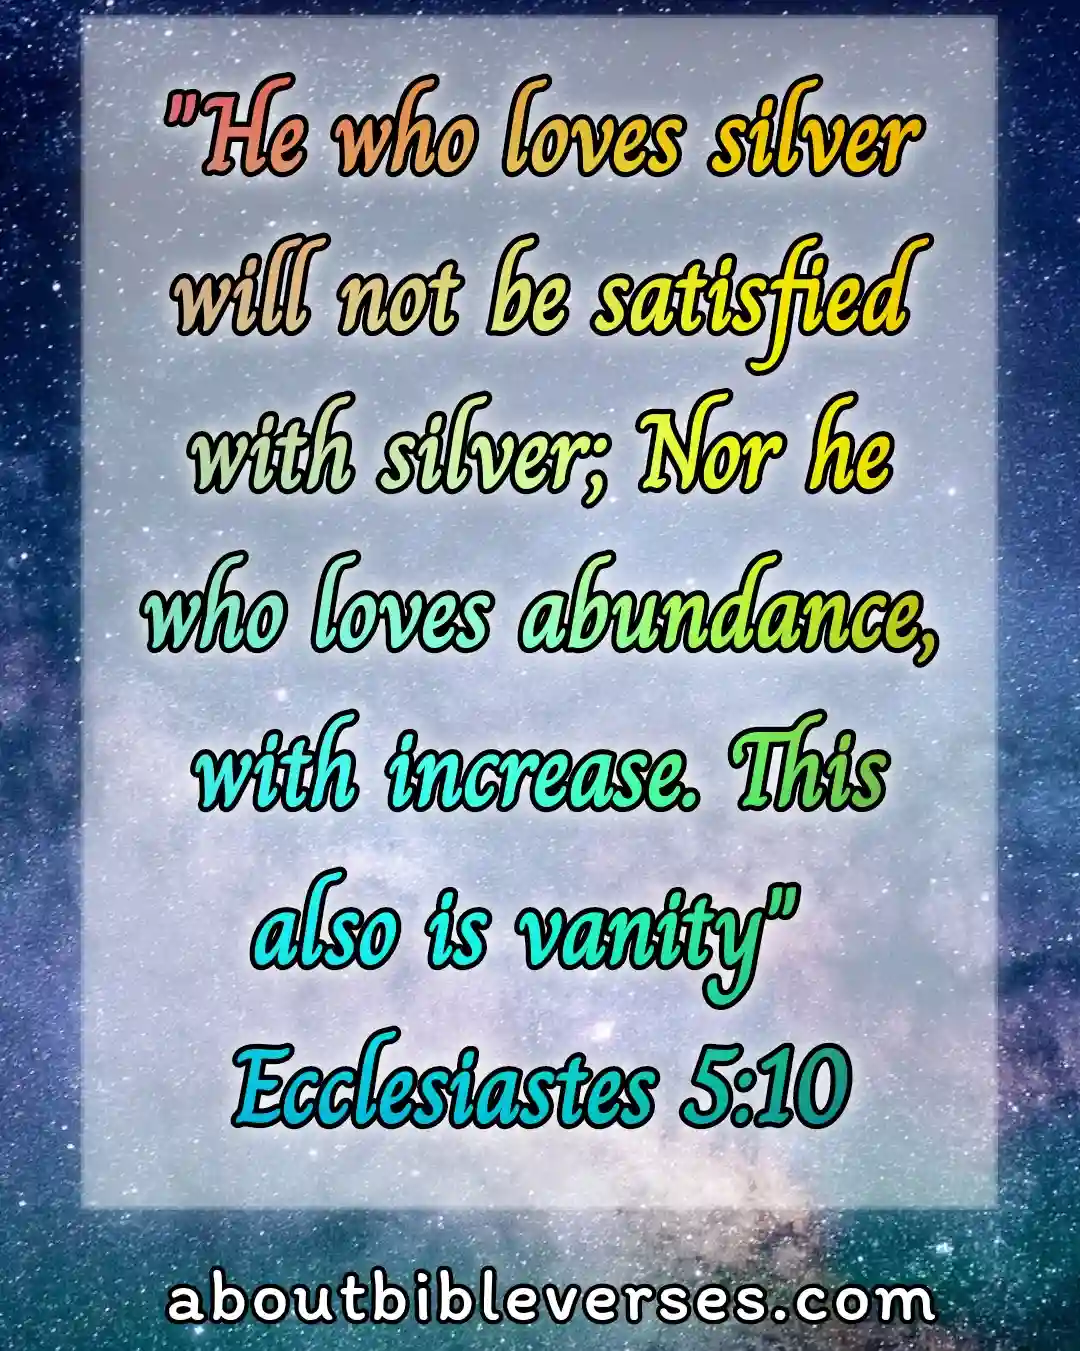 Bible Verses About Wealth And Prosperity (Ecclesiastes 5:10)